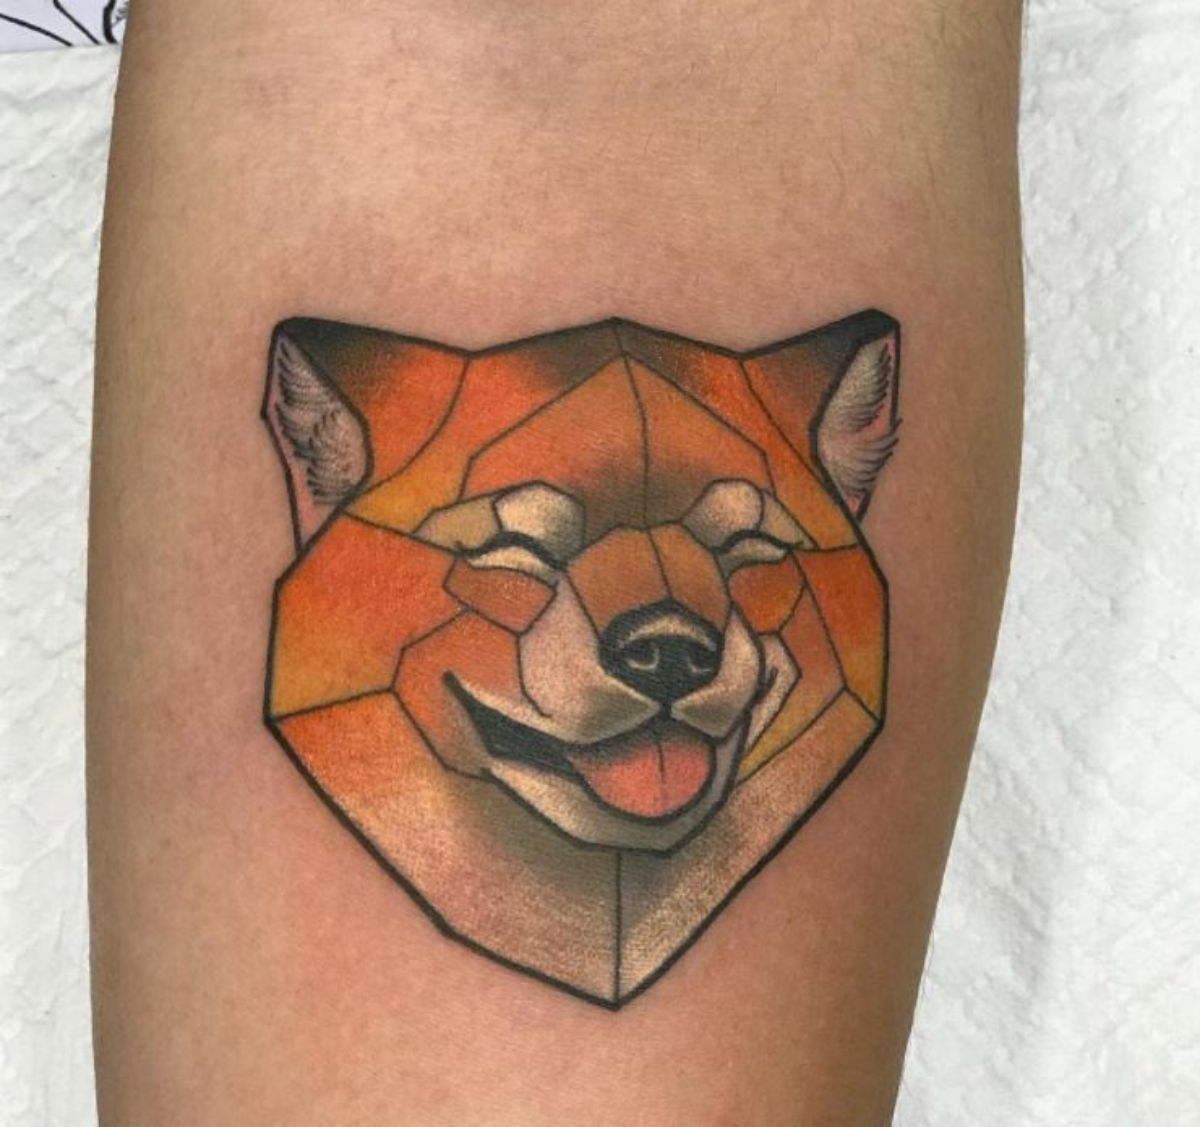 smiling with no eyes Shiba Inu in geometric design tattoo on the forearm